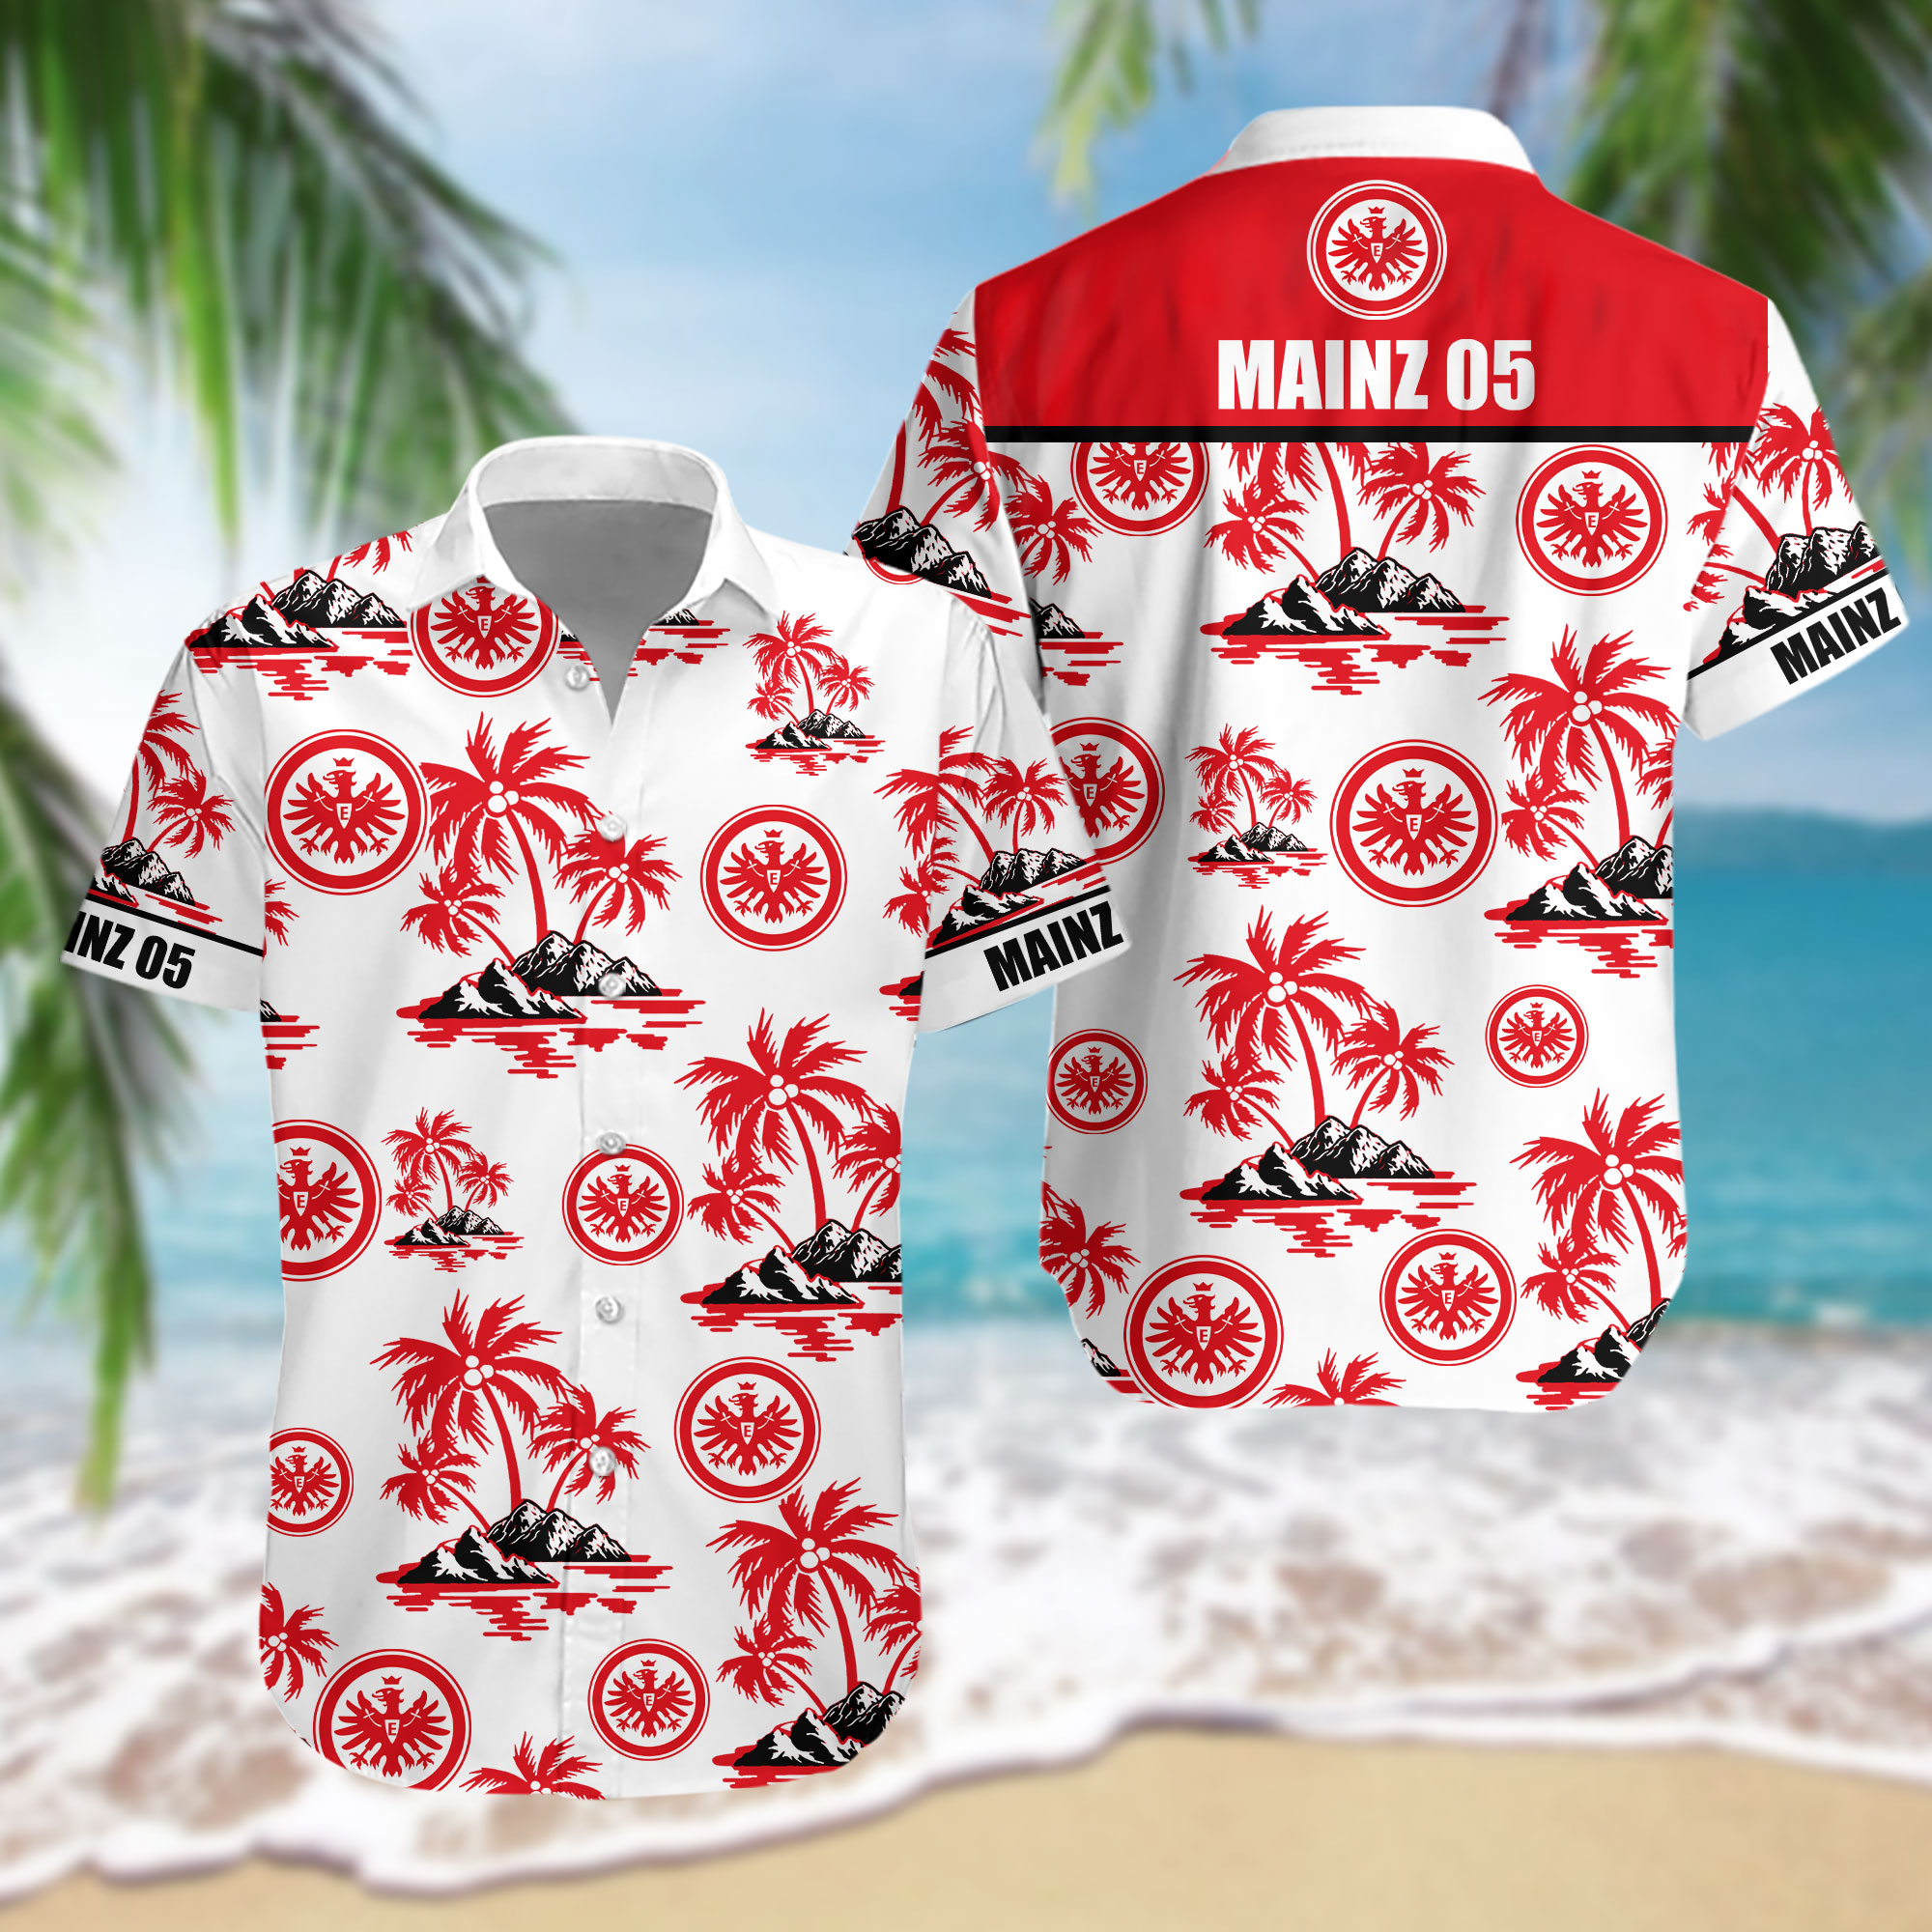 These Hawaiian Shirt will be a great choice for any type of occasion 6